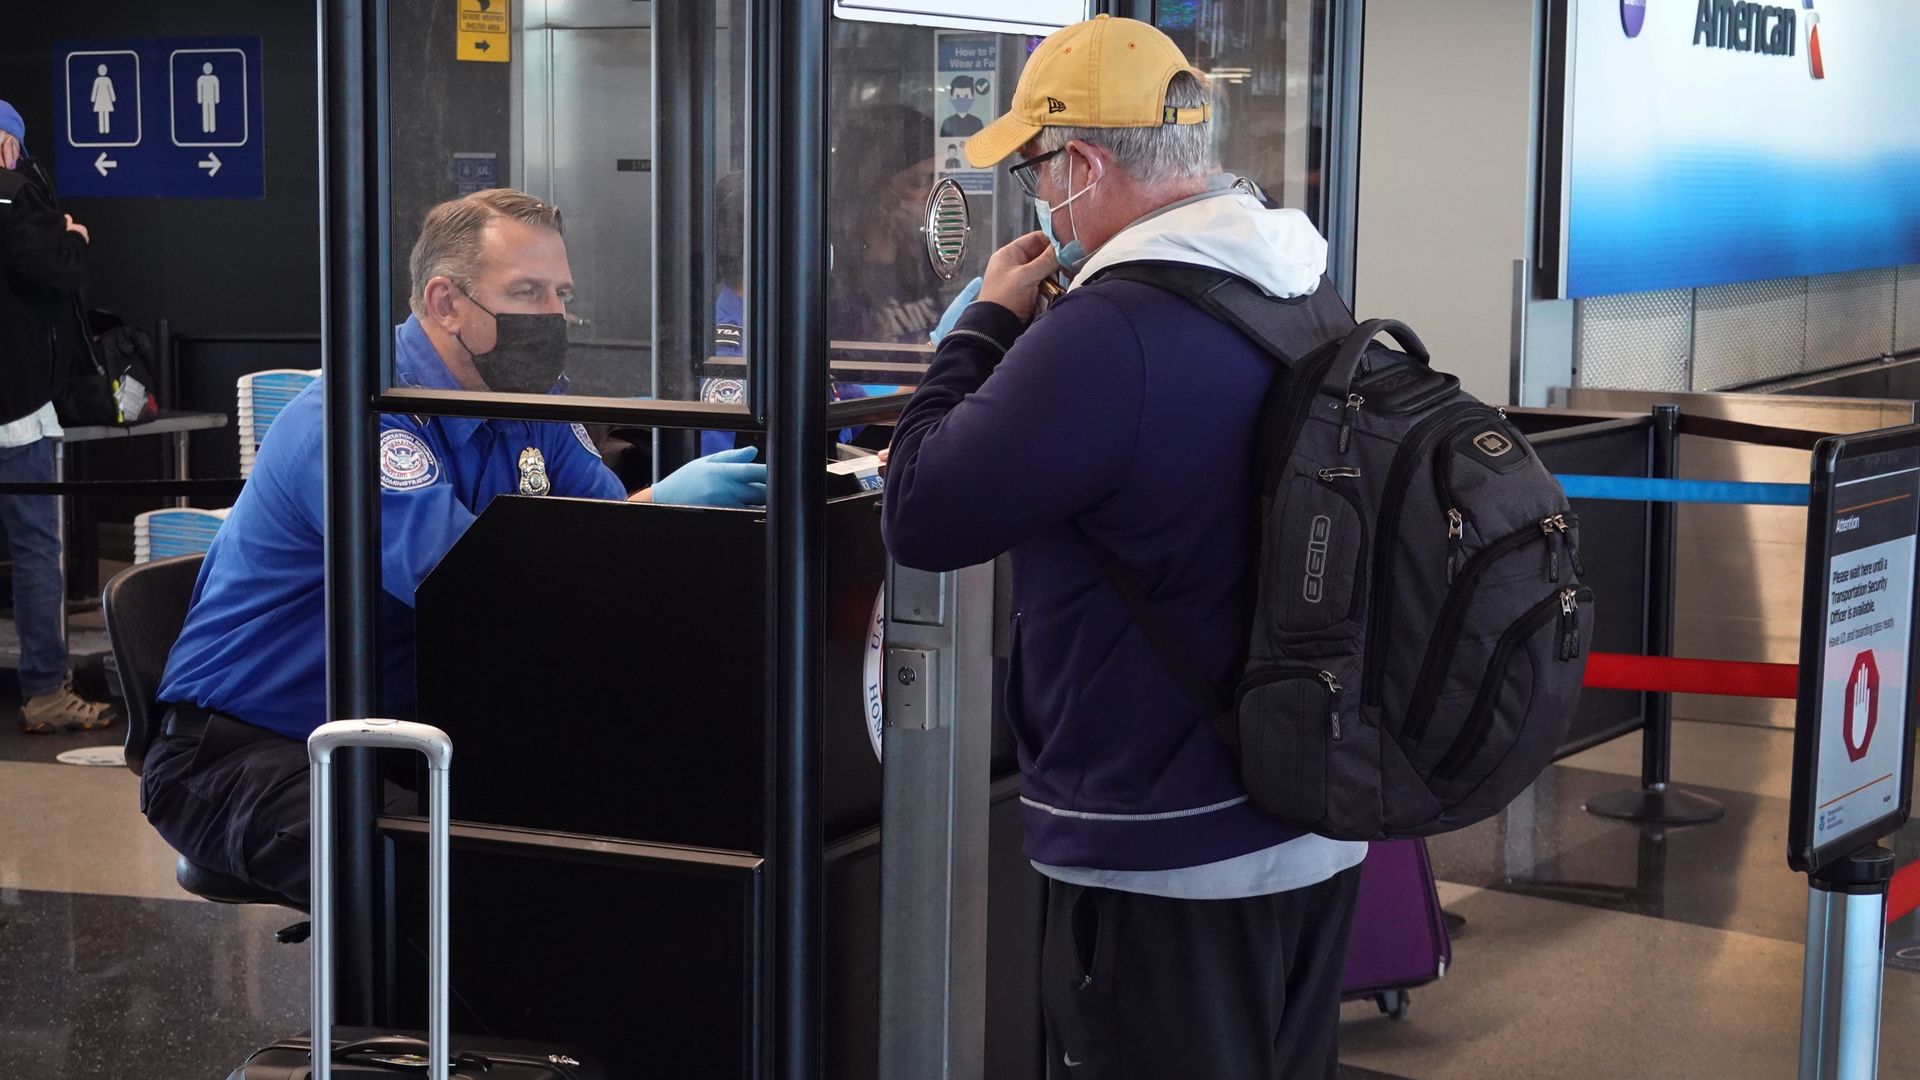 Transportation Security Administration (TSA) workers screen passengers at O'Hare International Airport on November 08, 2021 in Chicago, Illinois.